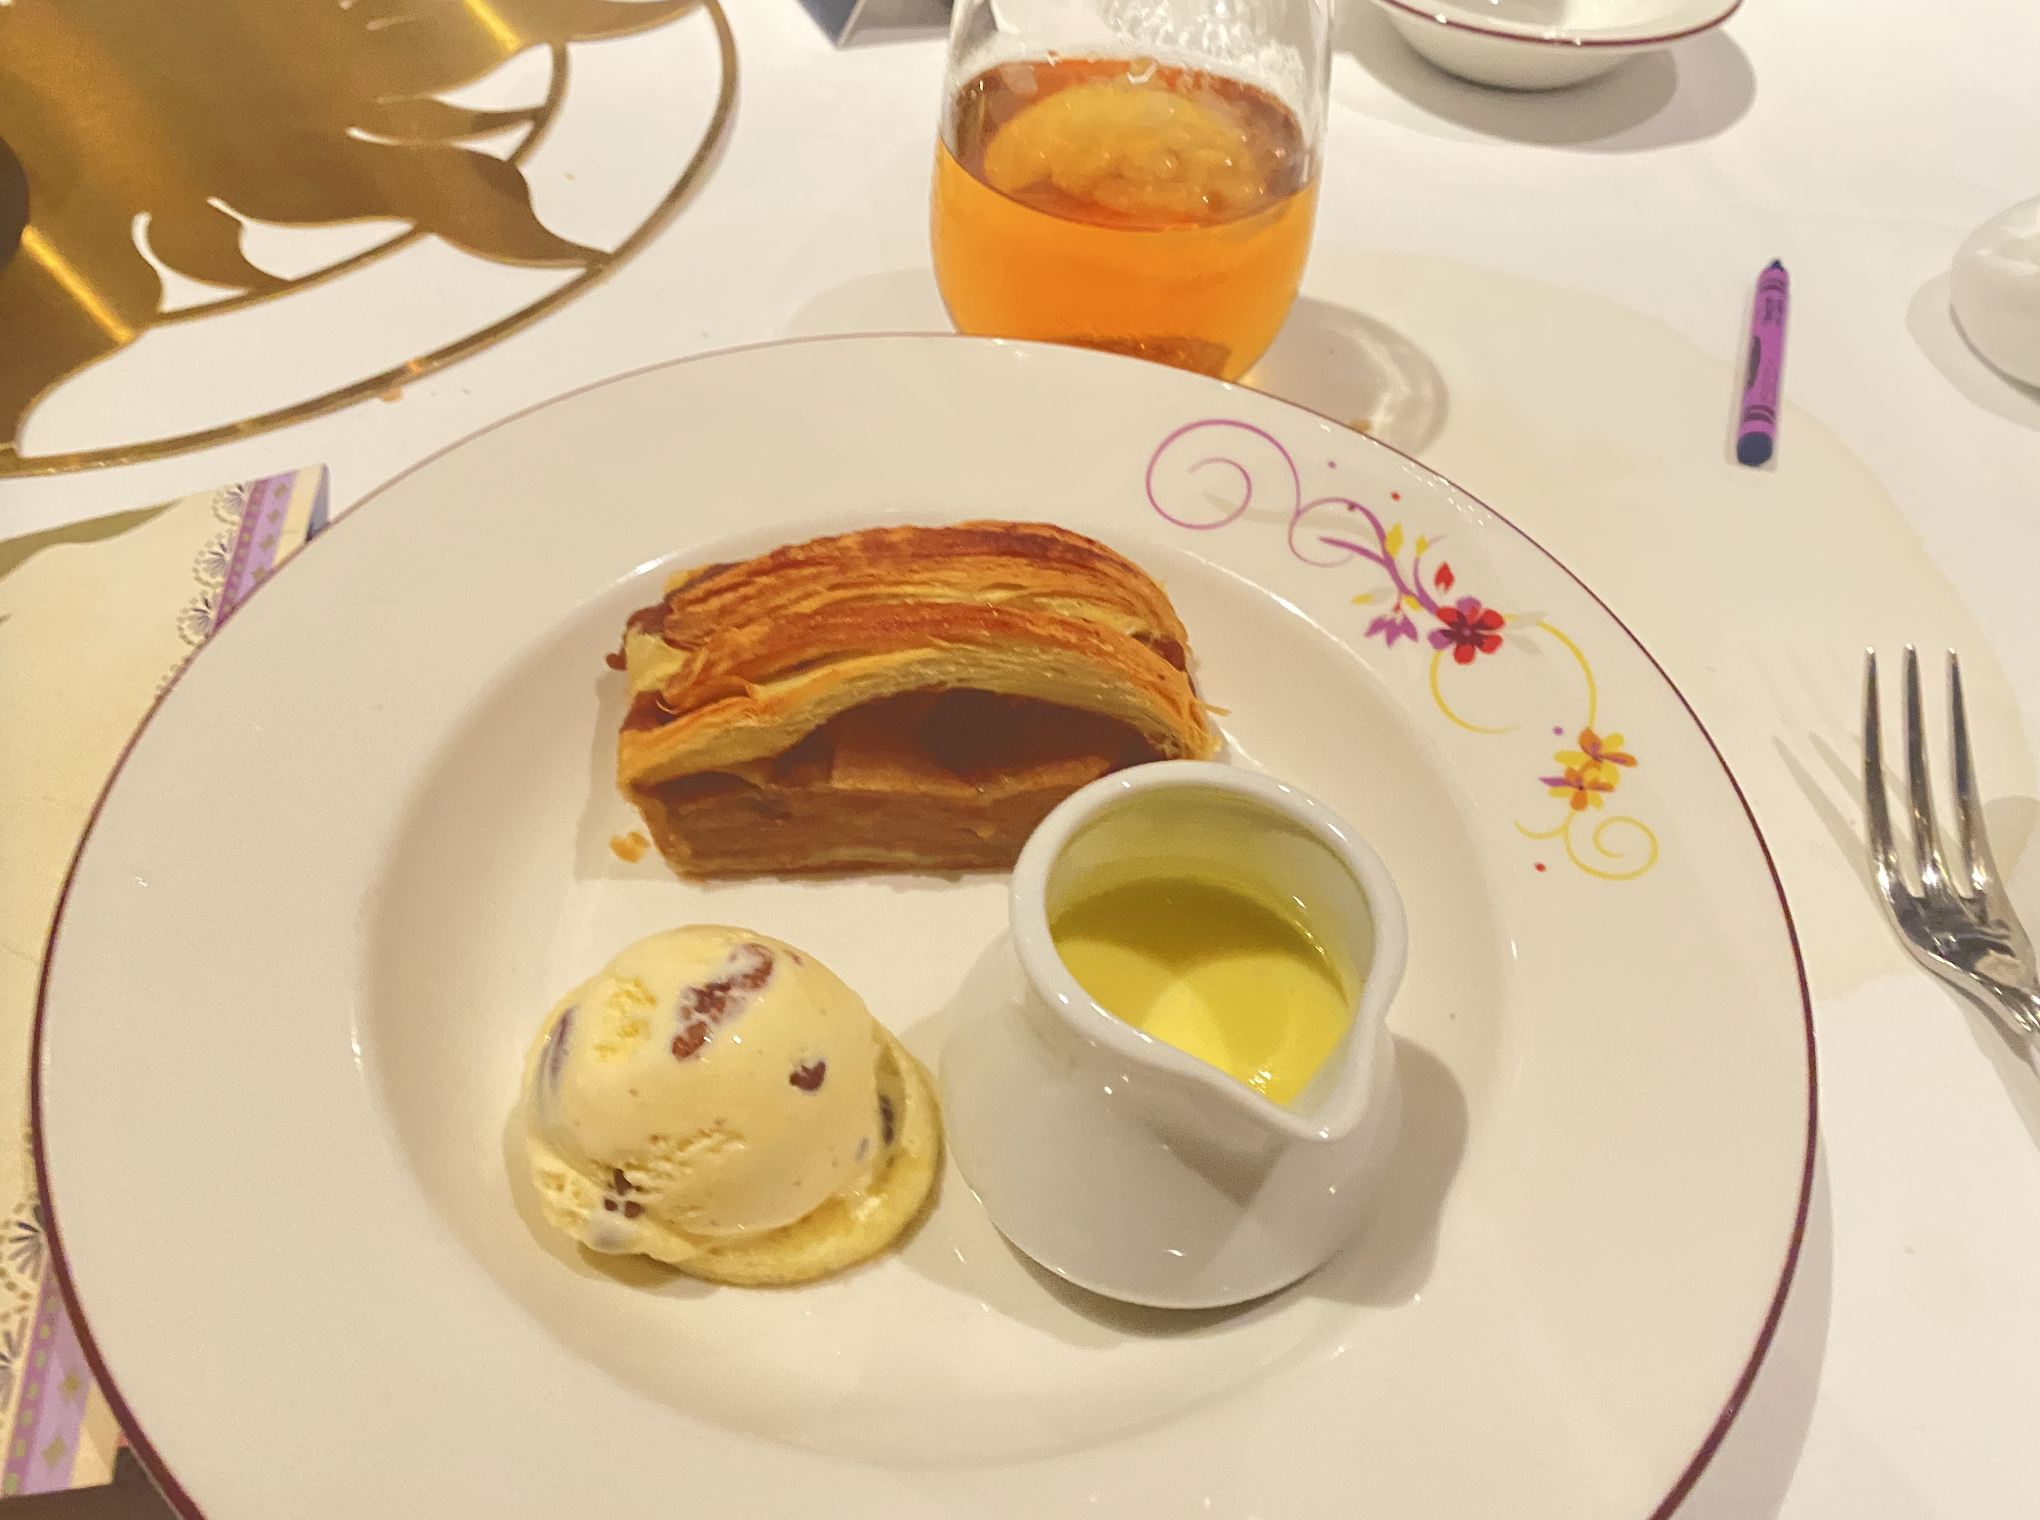 Dessert plate with a slice of layered pastry, a scoop of vanilla ice cream, and a small jug of yellow sauce, on a decorated table setting with a drink